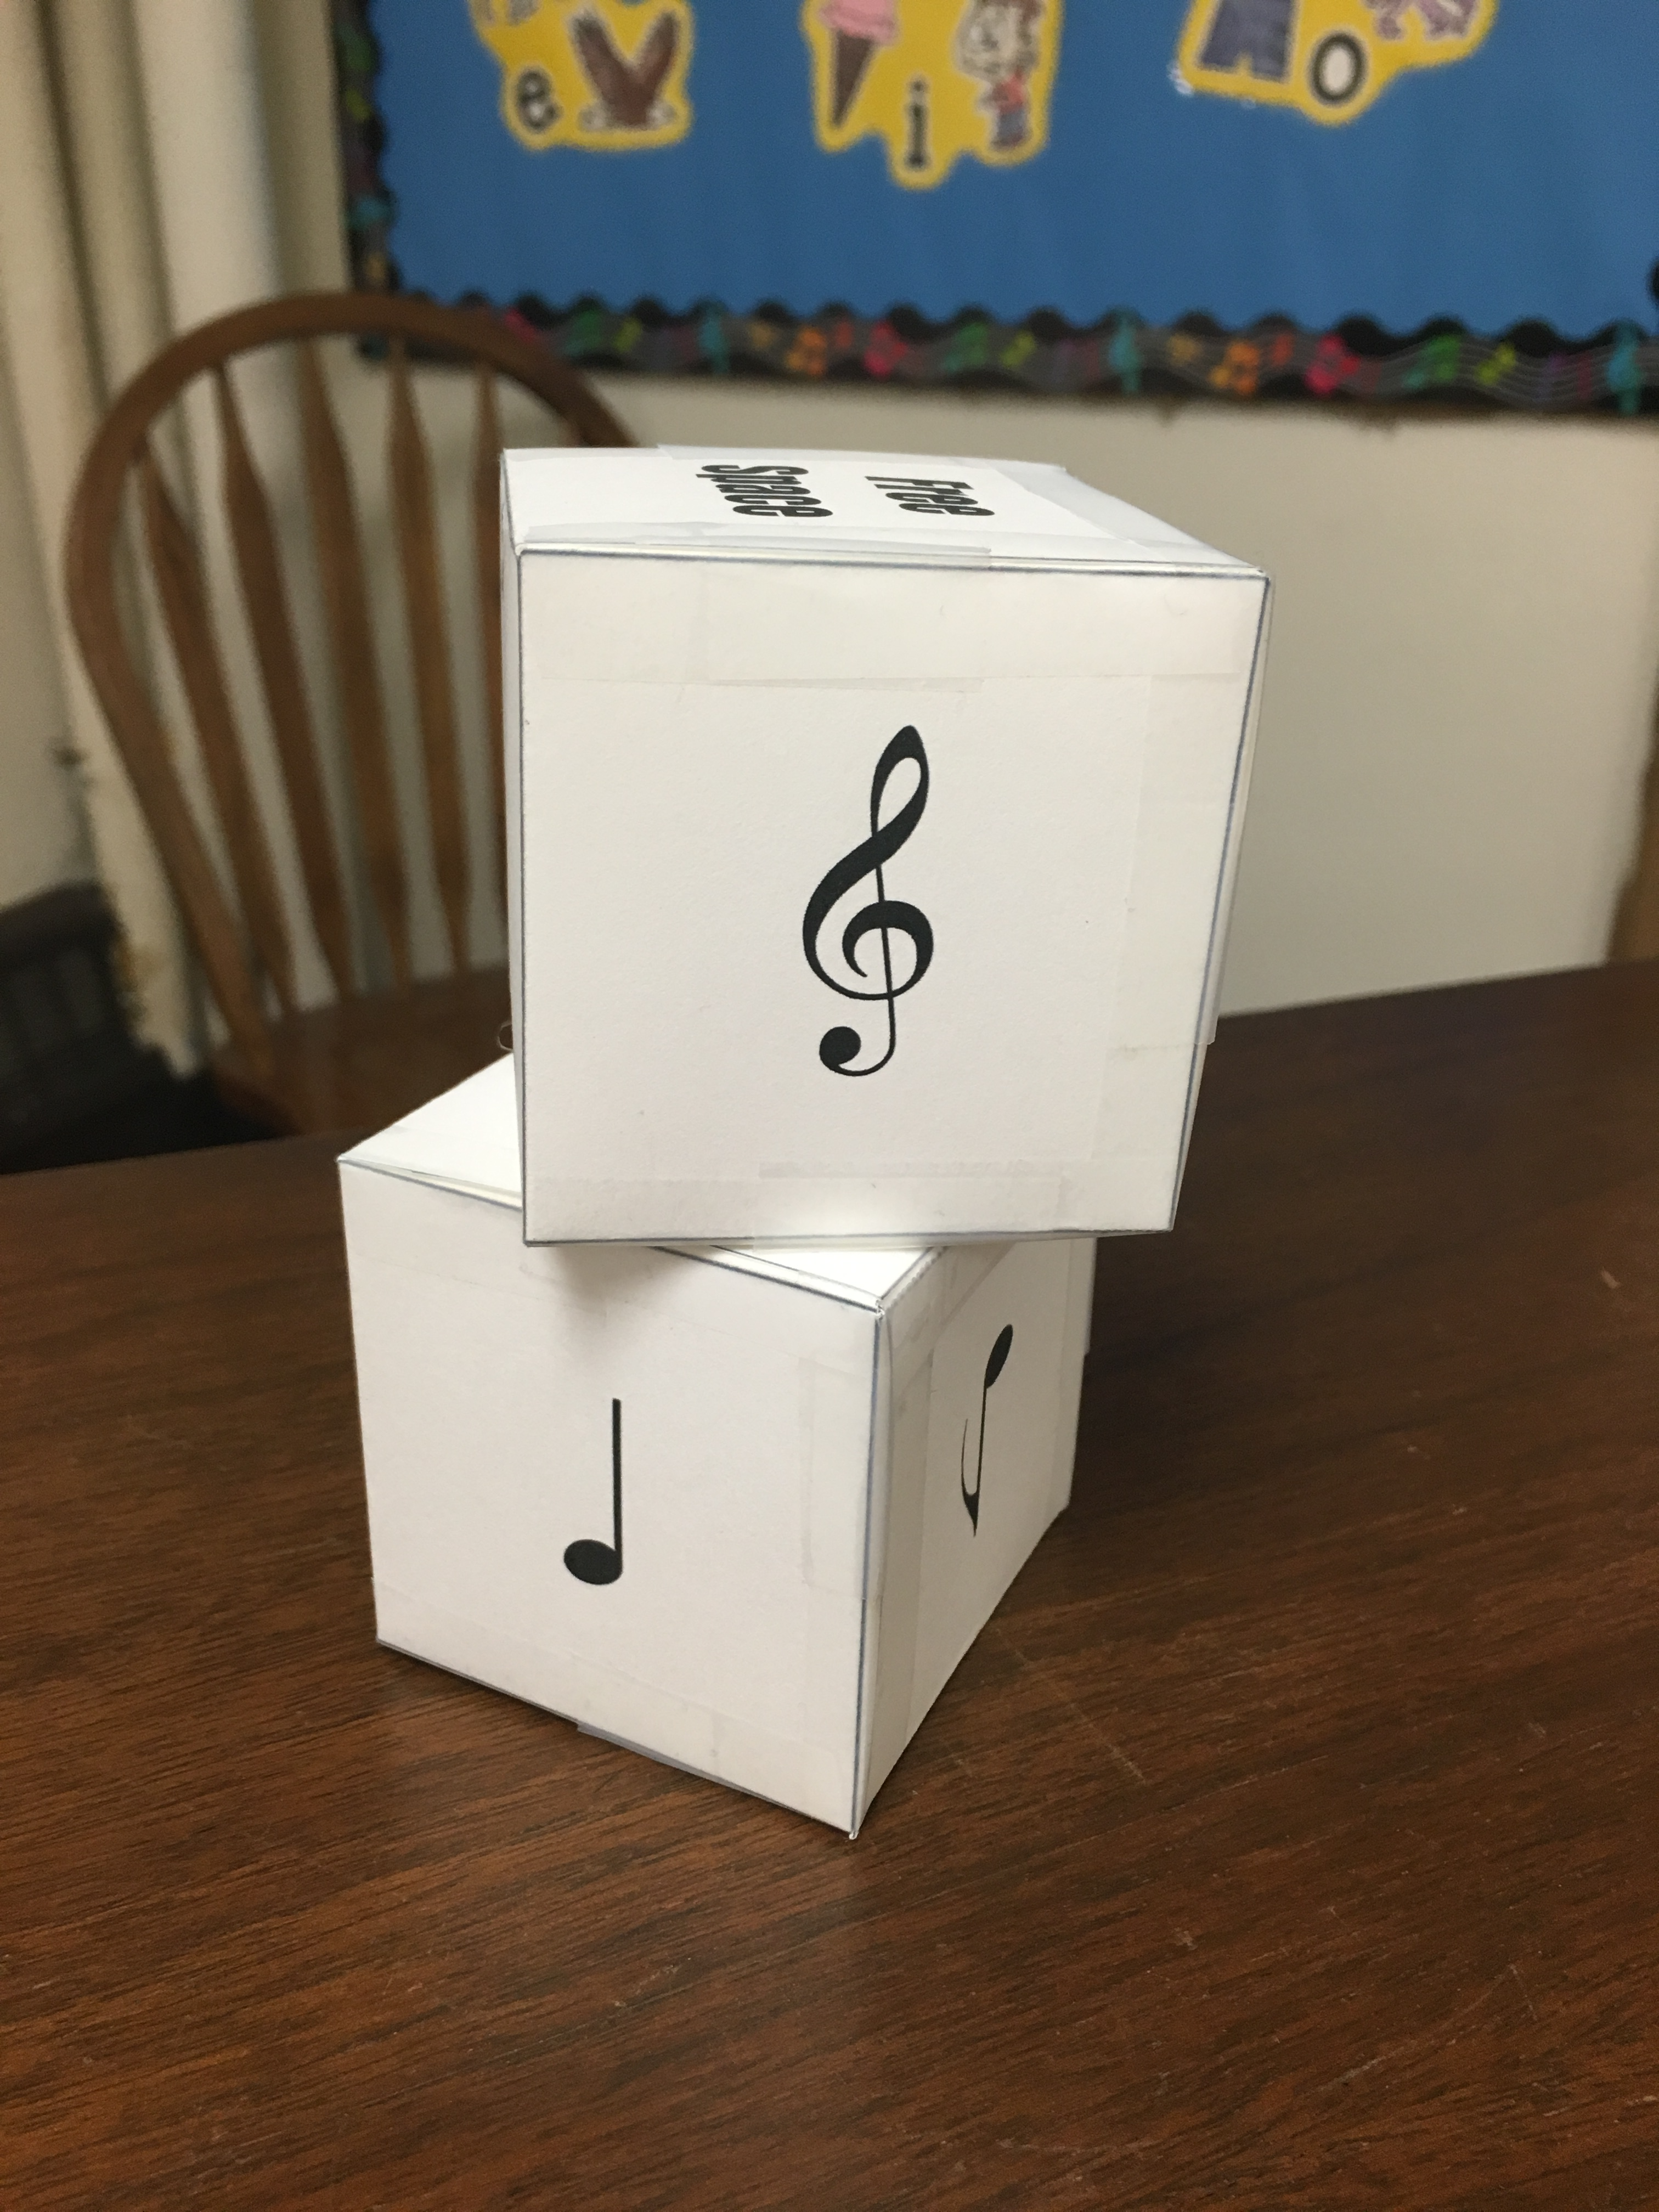 Paper dice used in a music literacy activity